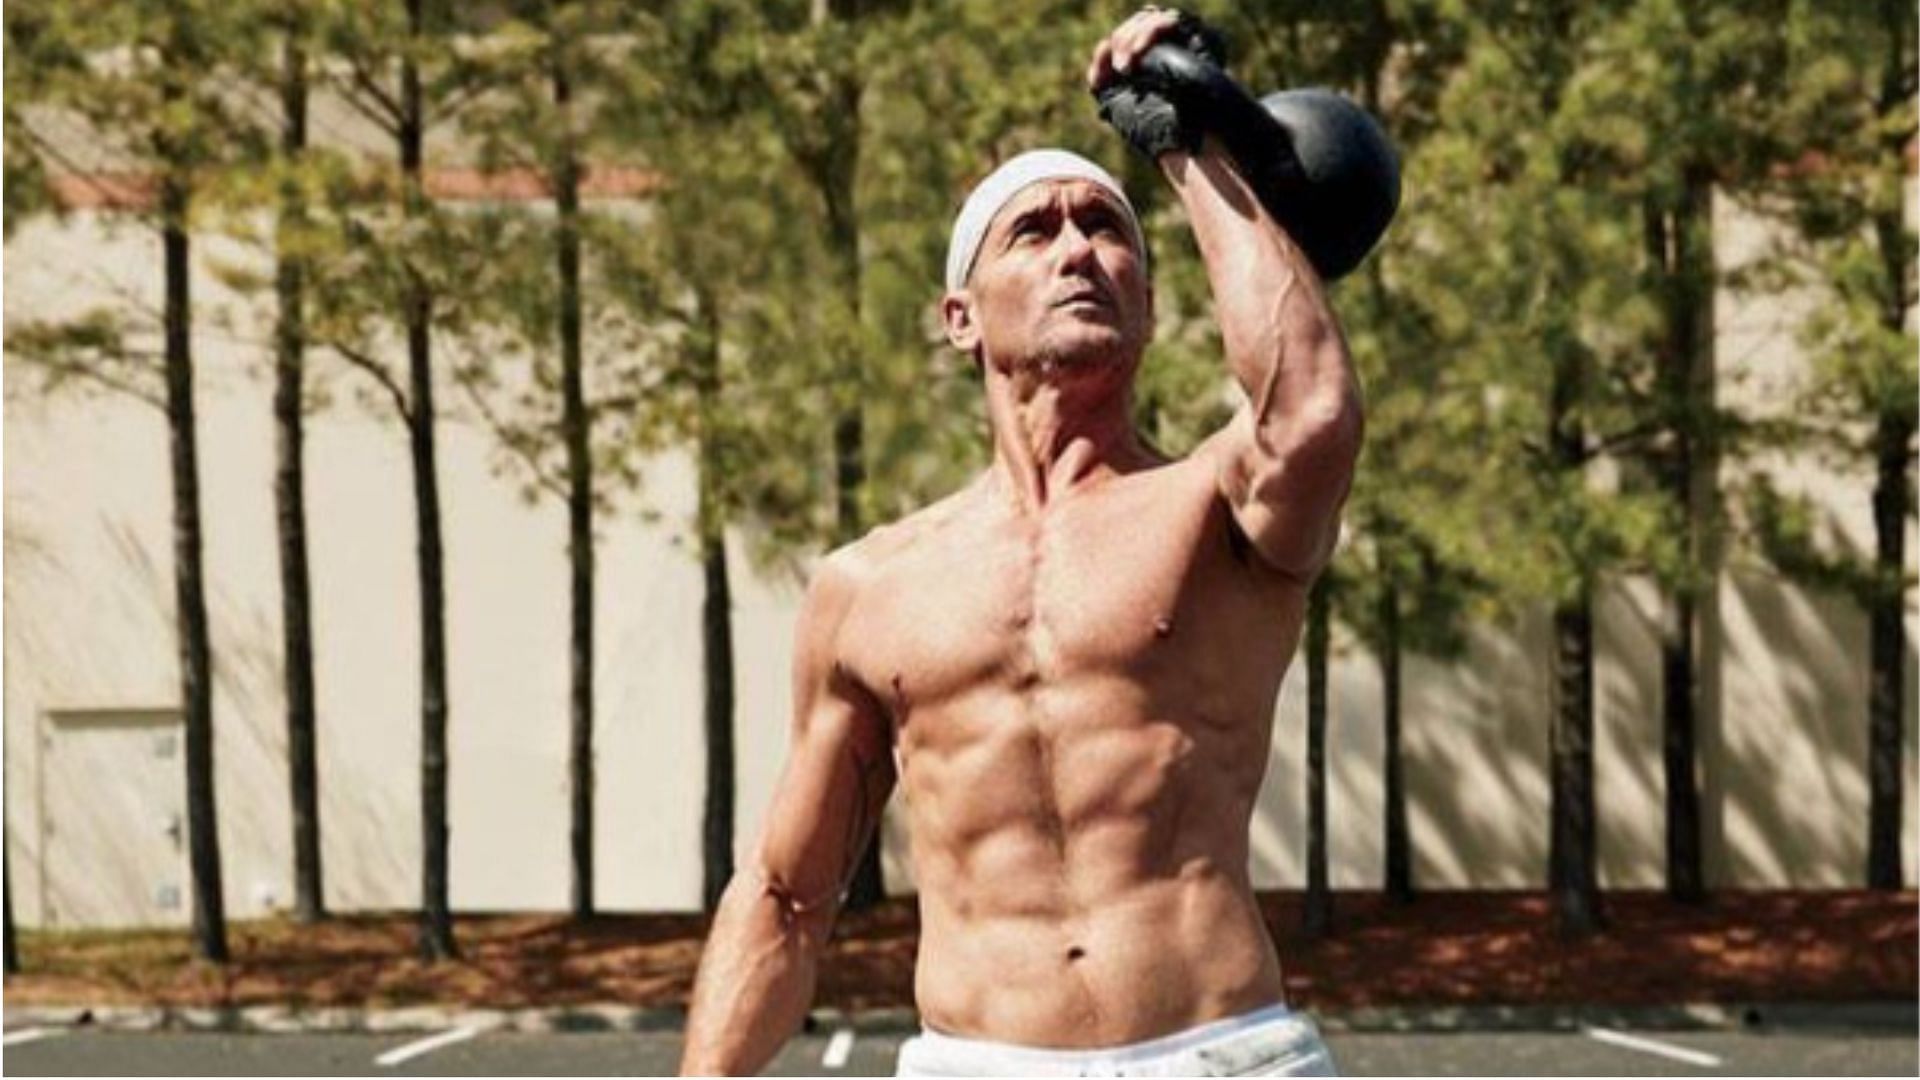 Do dumbbell exercises to get chiselled abs just like Tim McGraw. (Image via Instagram/@mcgrawupdates)